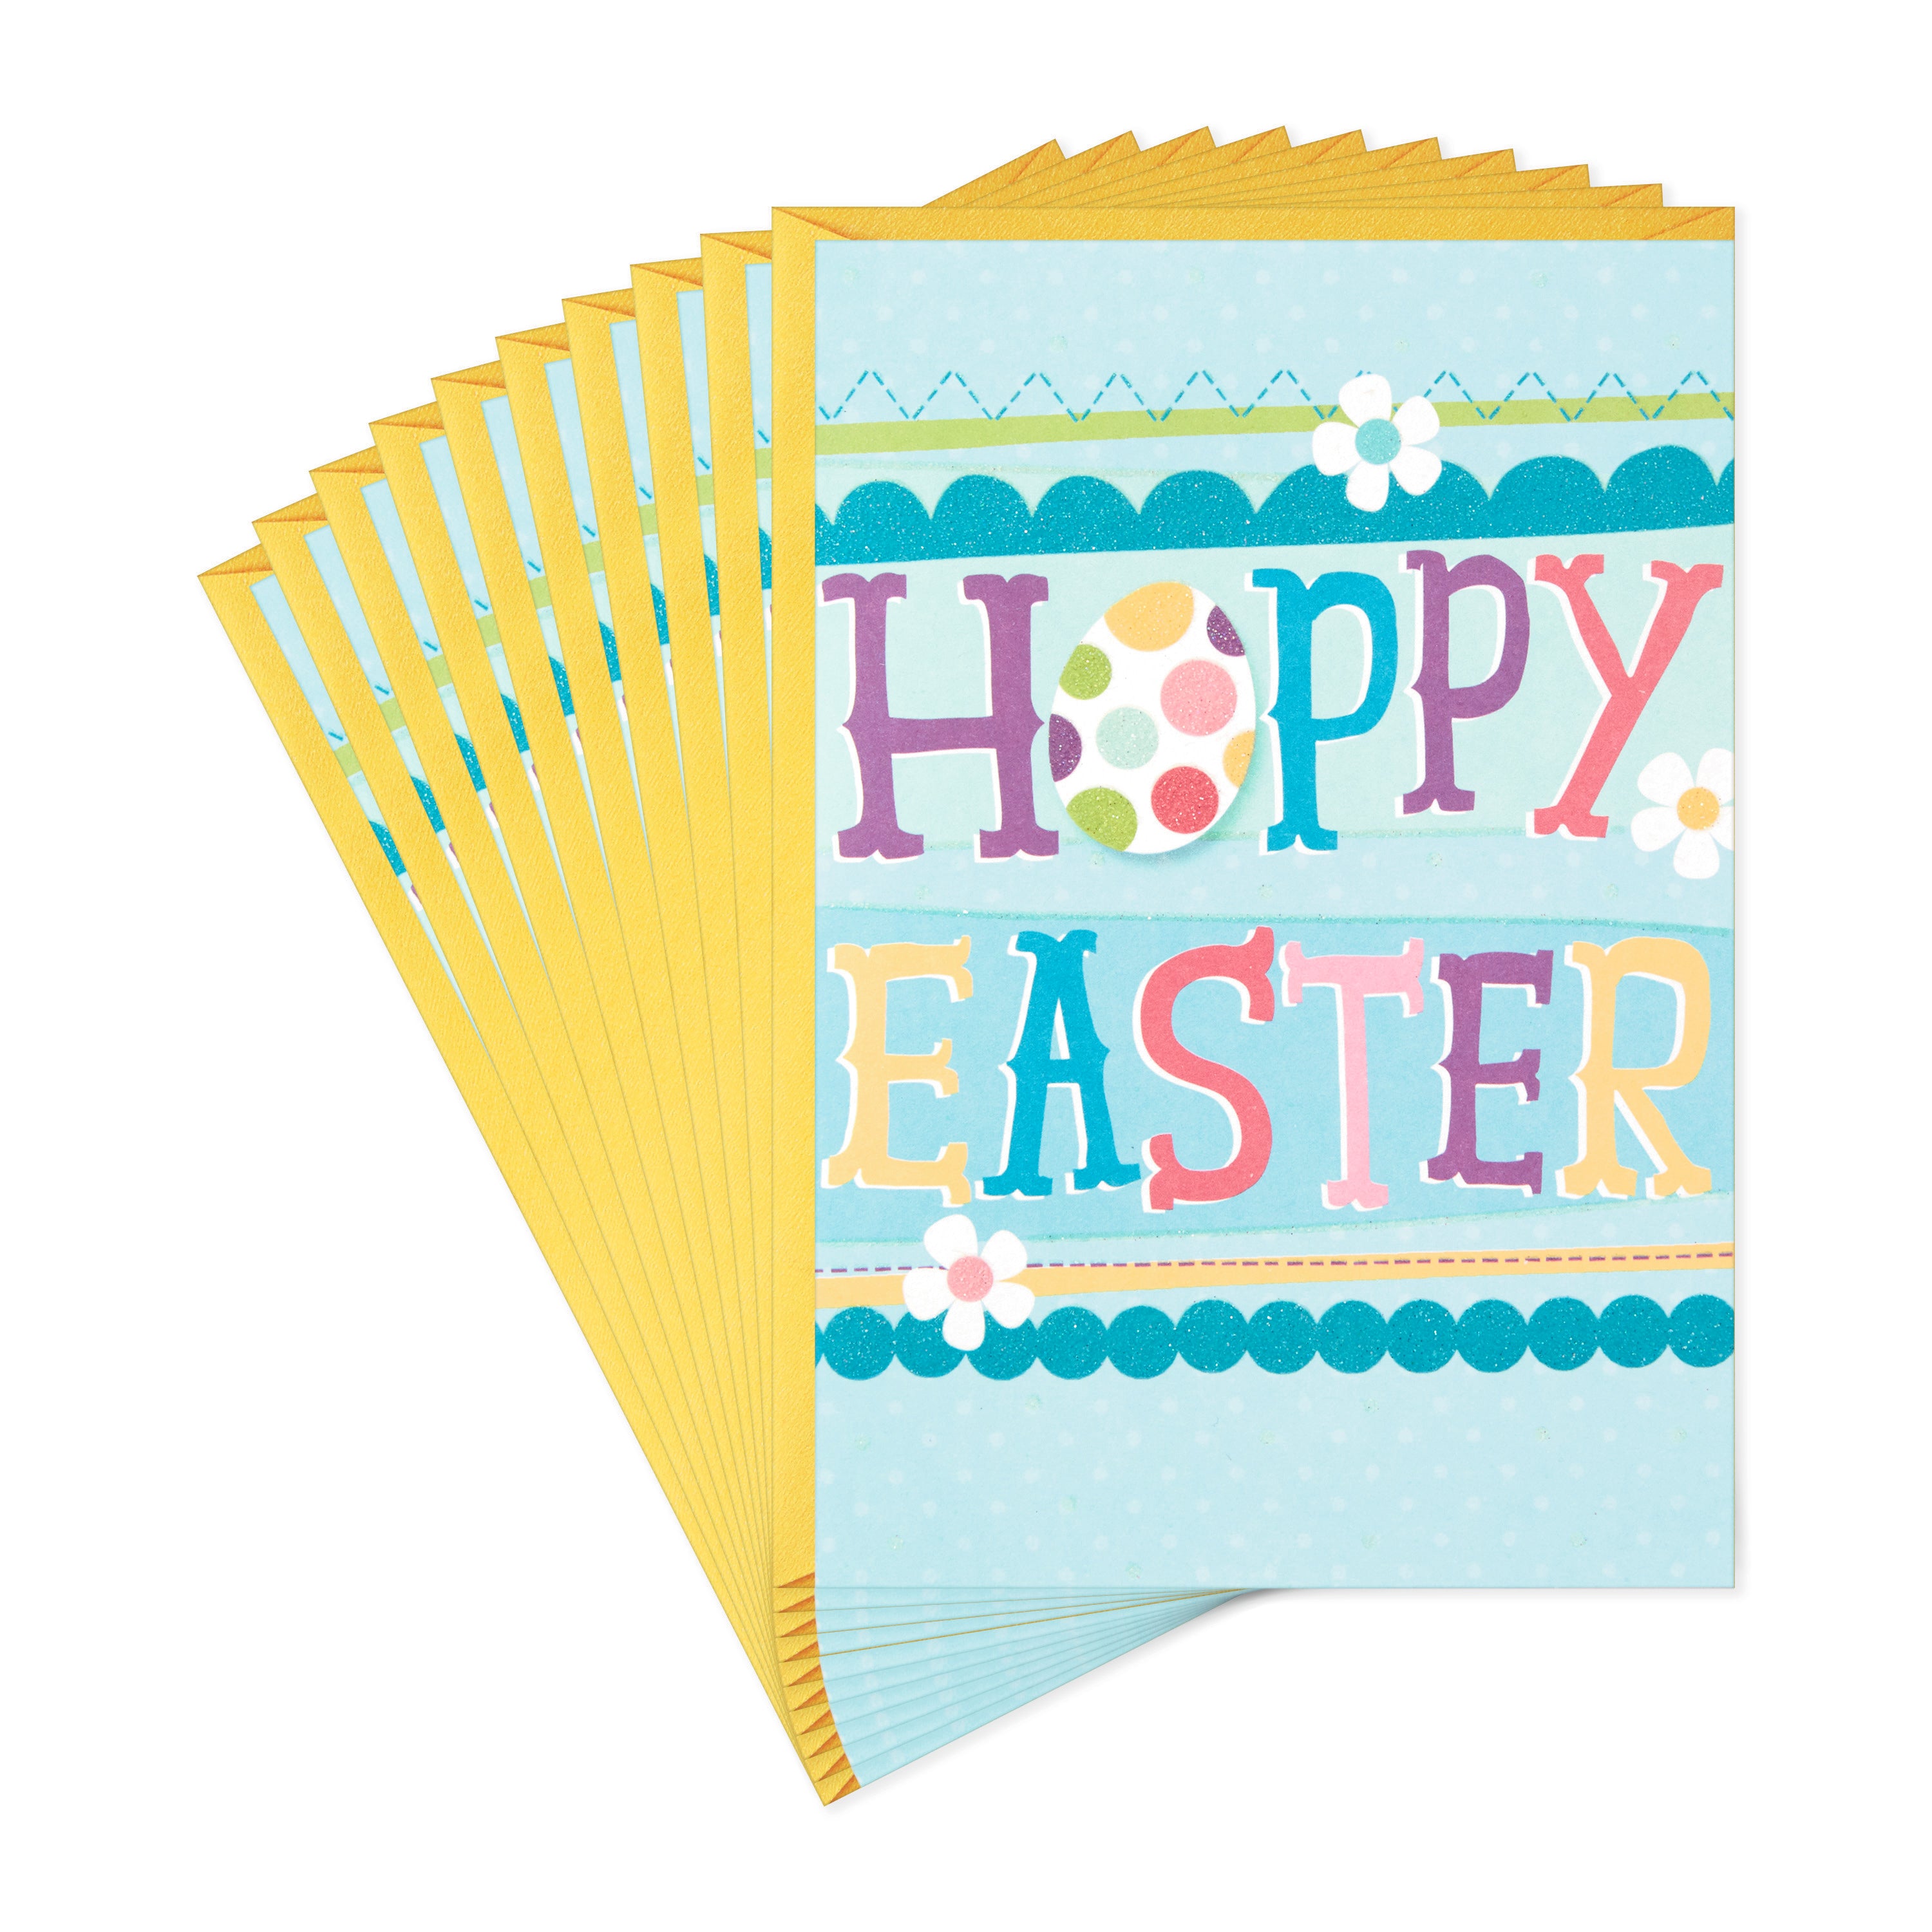 Pack of Easter Cards, Hoppy Easter (10 Cards with Envelopes)